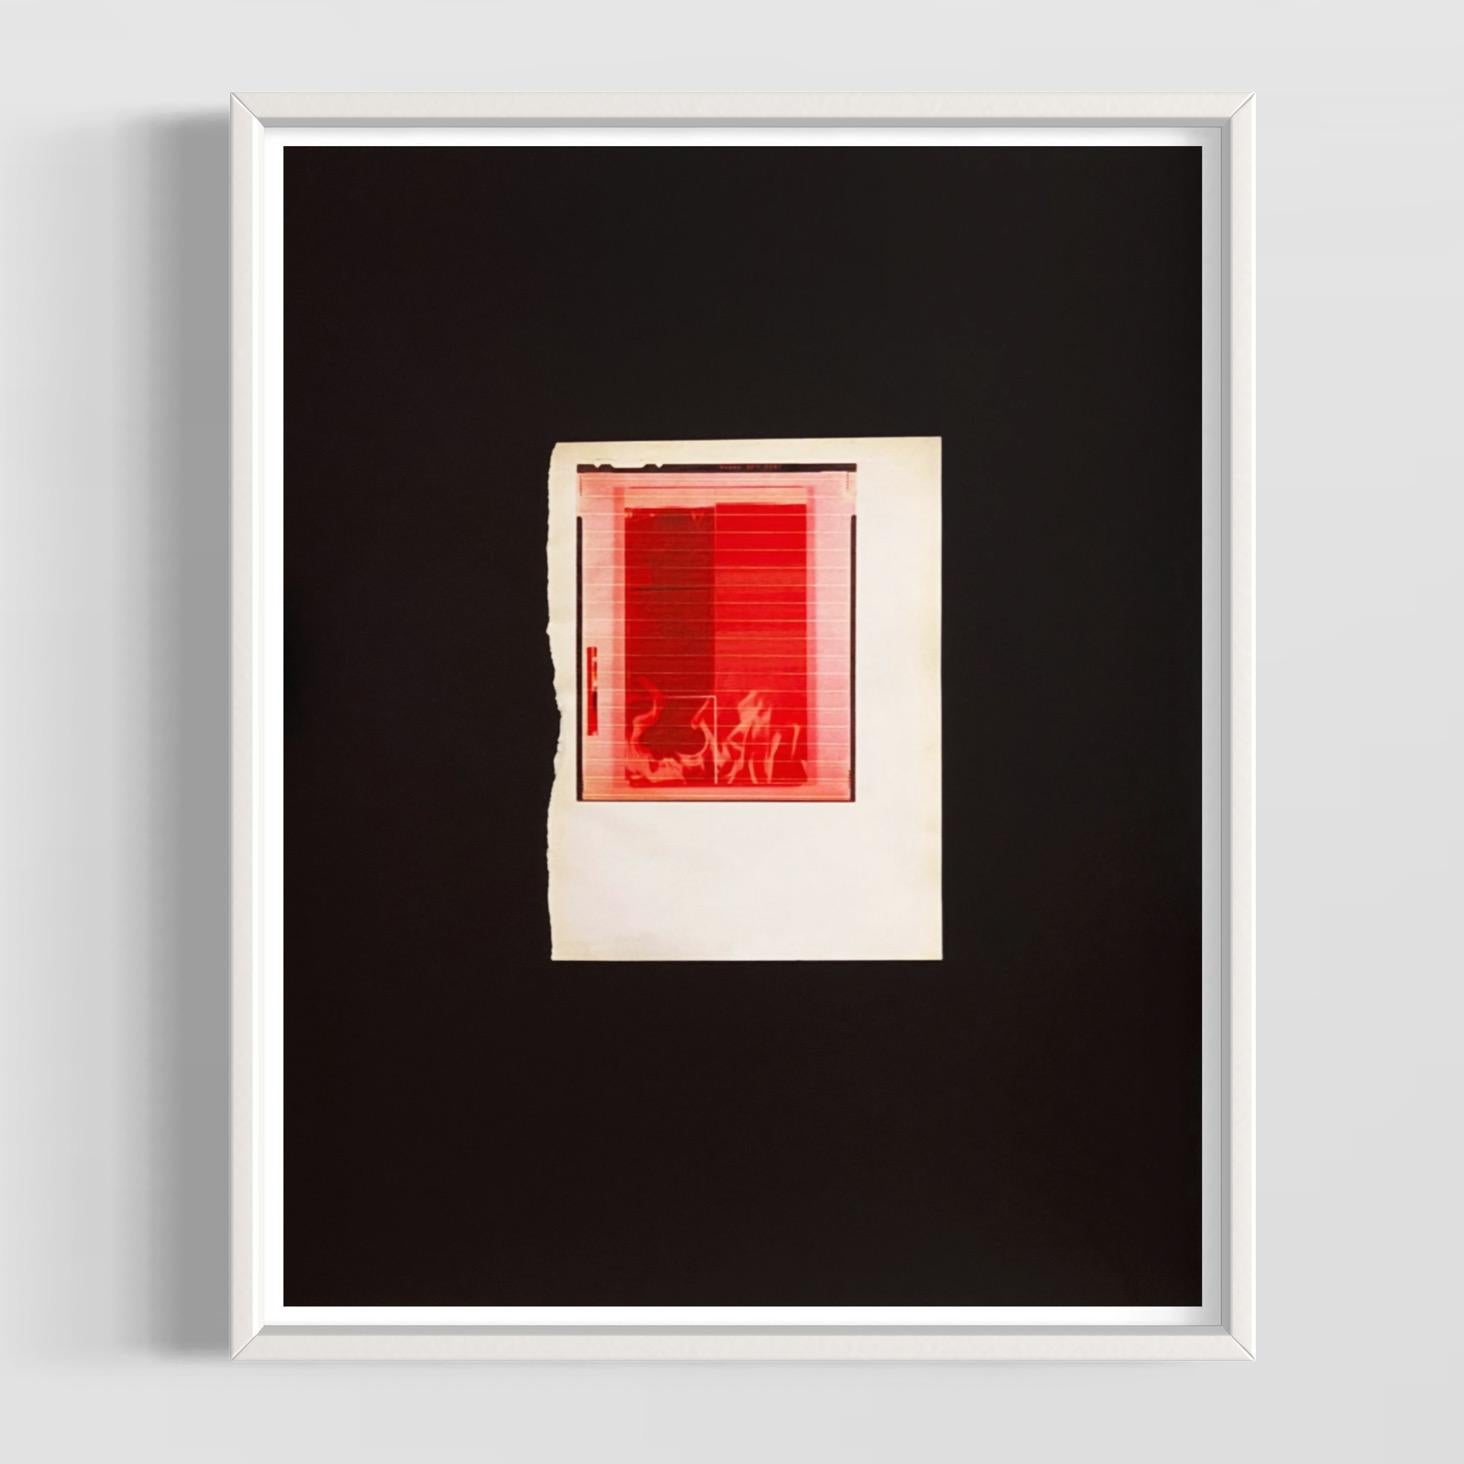 Wade Guyton (American, b. 1972)
Red Fire for SMC, 2018
Medium: Epson Ultrachrome HDX print on coated fine art paper
Dimensions: 19 x 15 in (48 x 38 cm)
Edition of 100 + 10 AP: Hand signed and numbered
Condition: Mint (sold unframed)